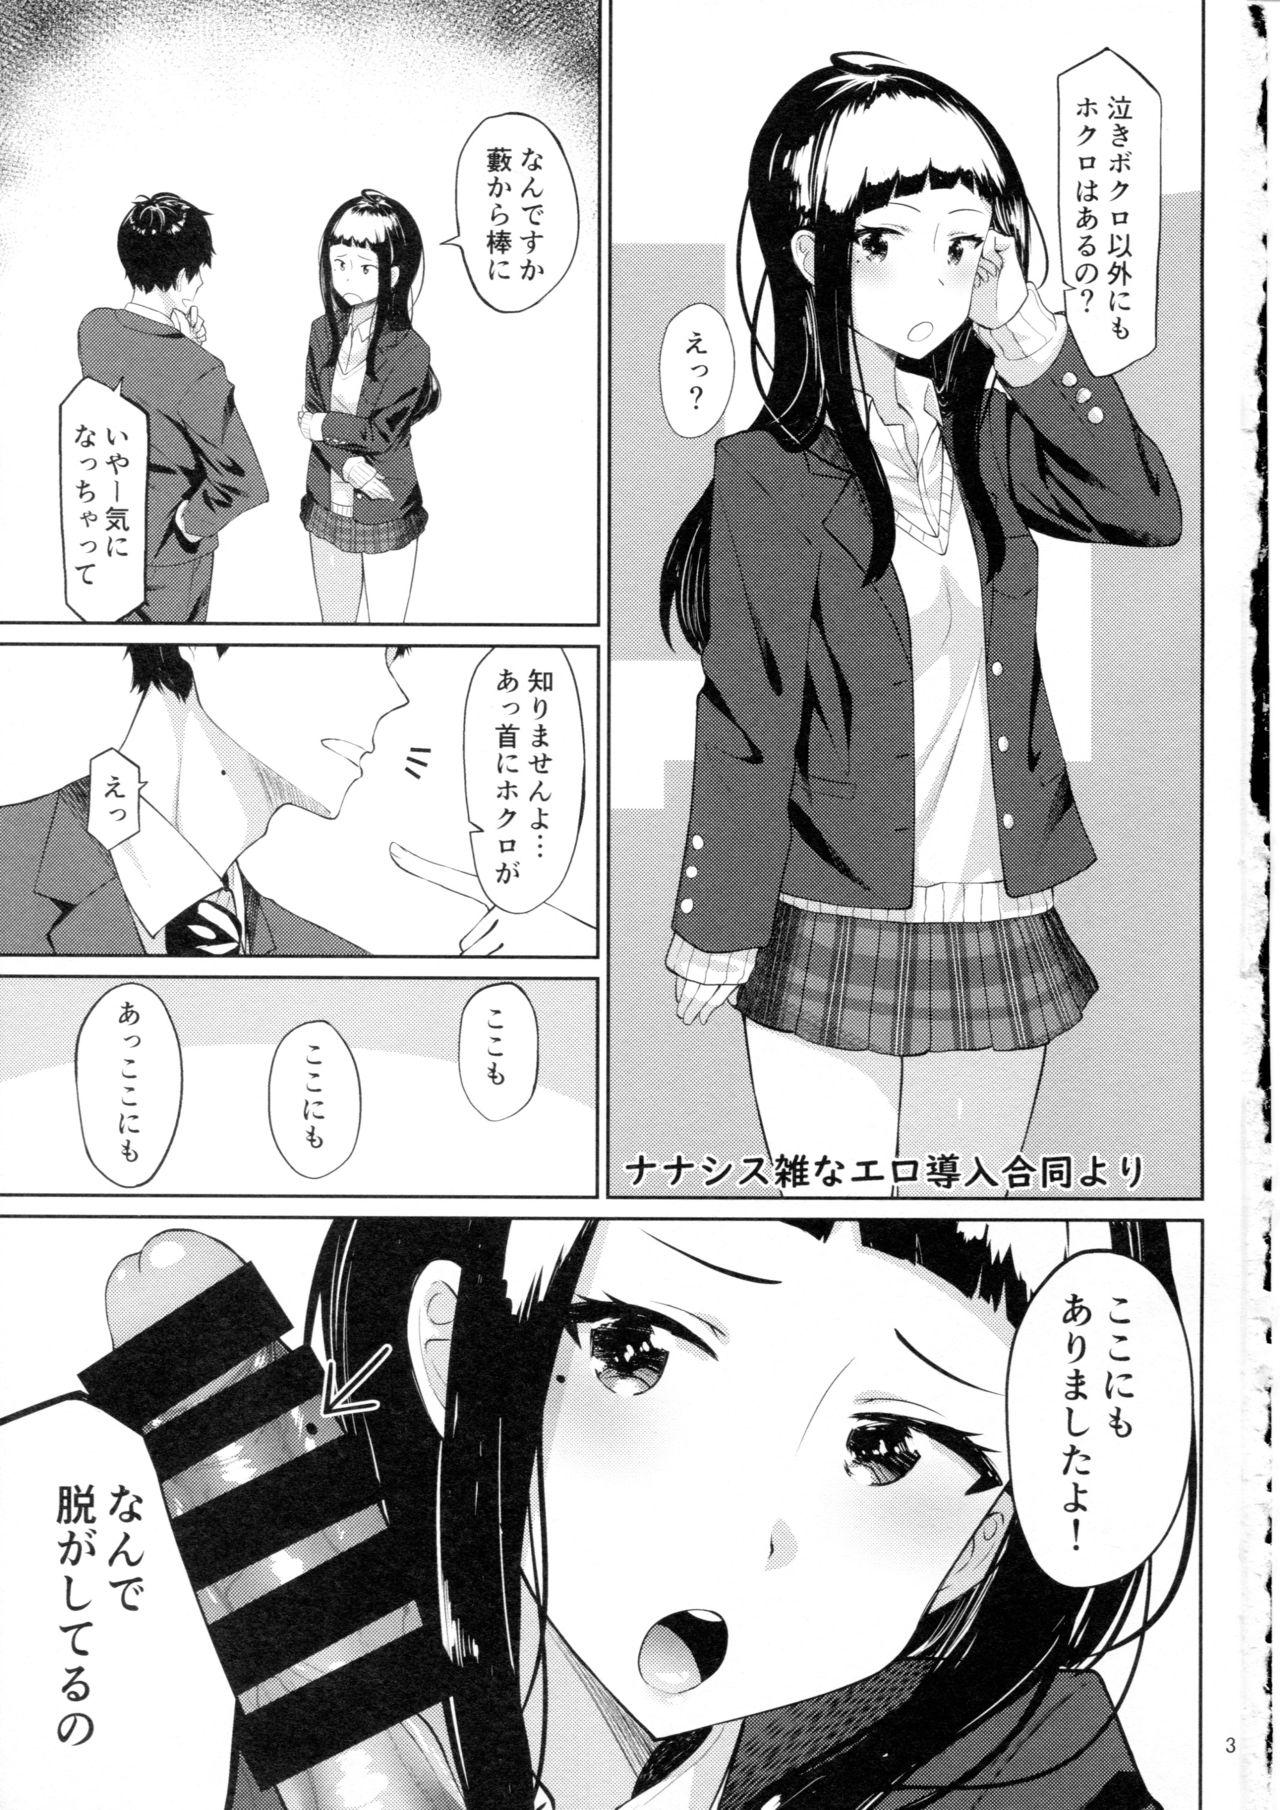 Ball Busting D.EMOTION - Tokyo 7th sisters Gape - Page 2